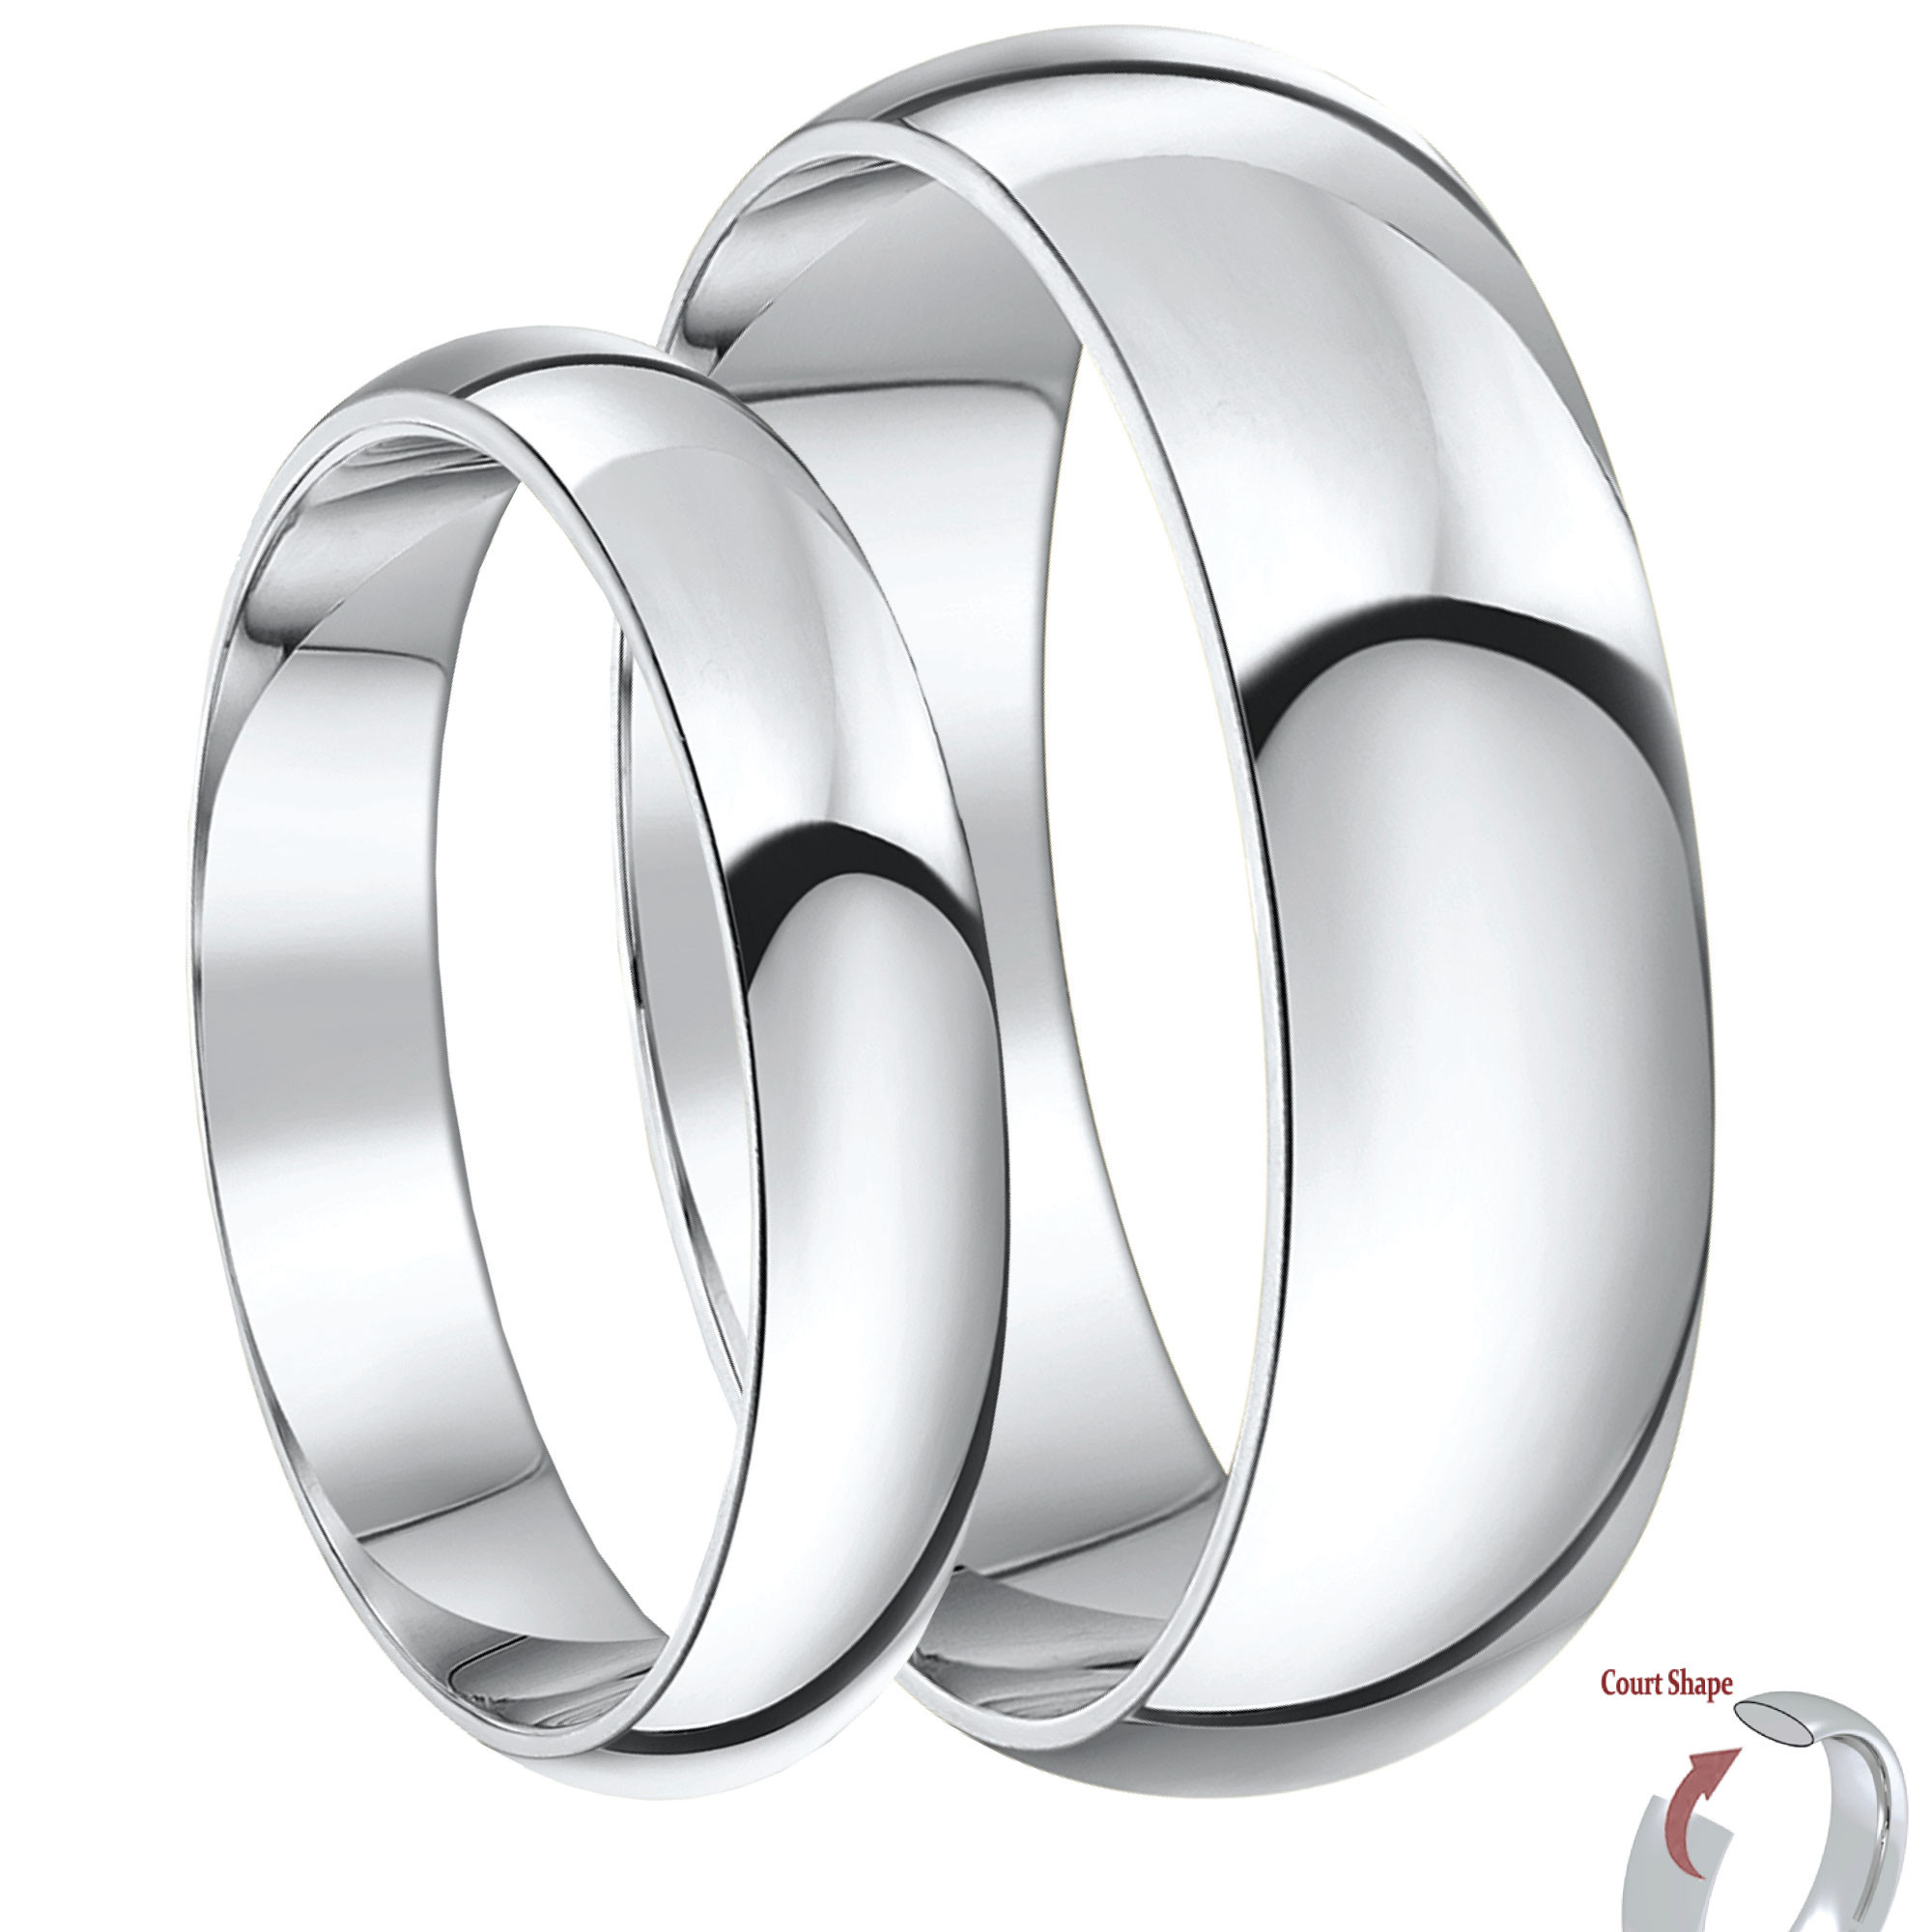 White Gold Wedding Ring Sets His And Hers
 His & Hers 4&6mm 9ct White Gold Court Shaped Wedding Ring